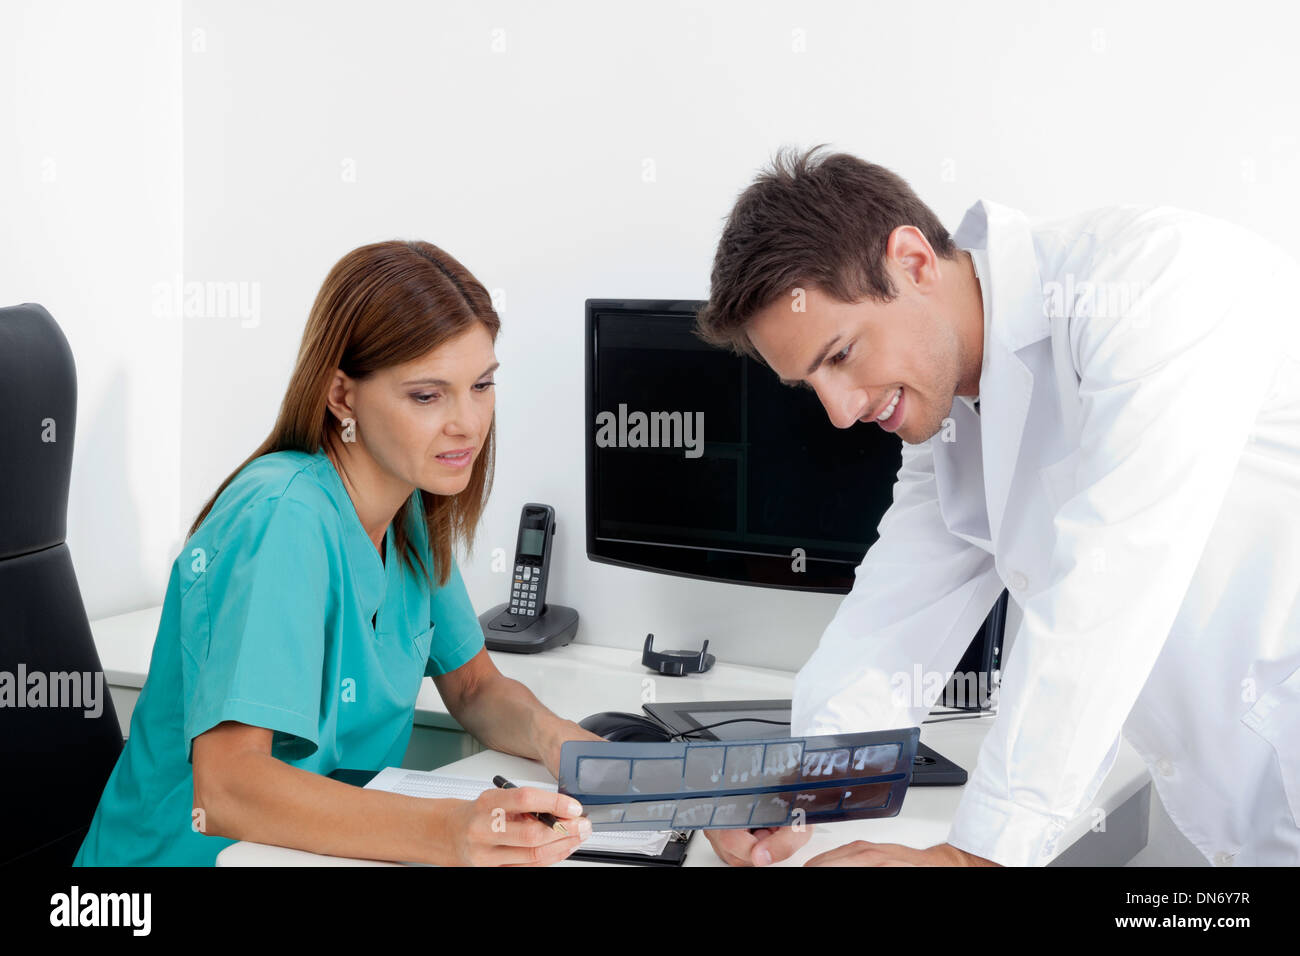 Dentist With Assistant Analyzing X-Ray Report Stock Photo